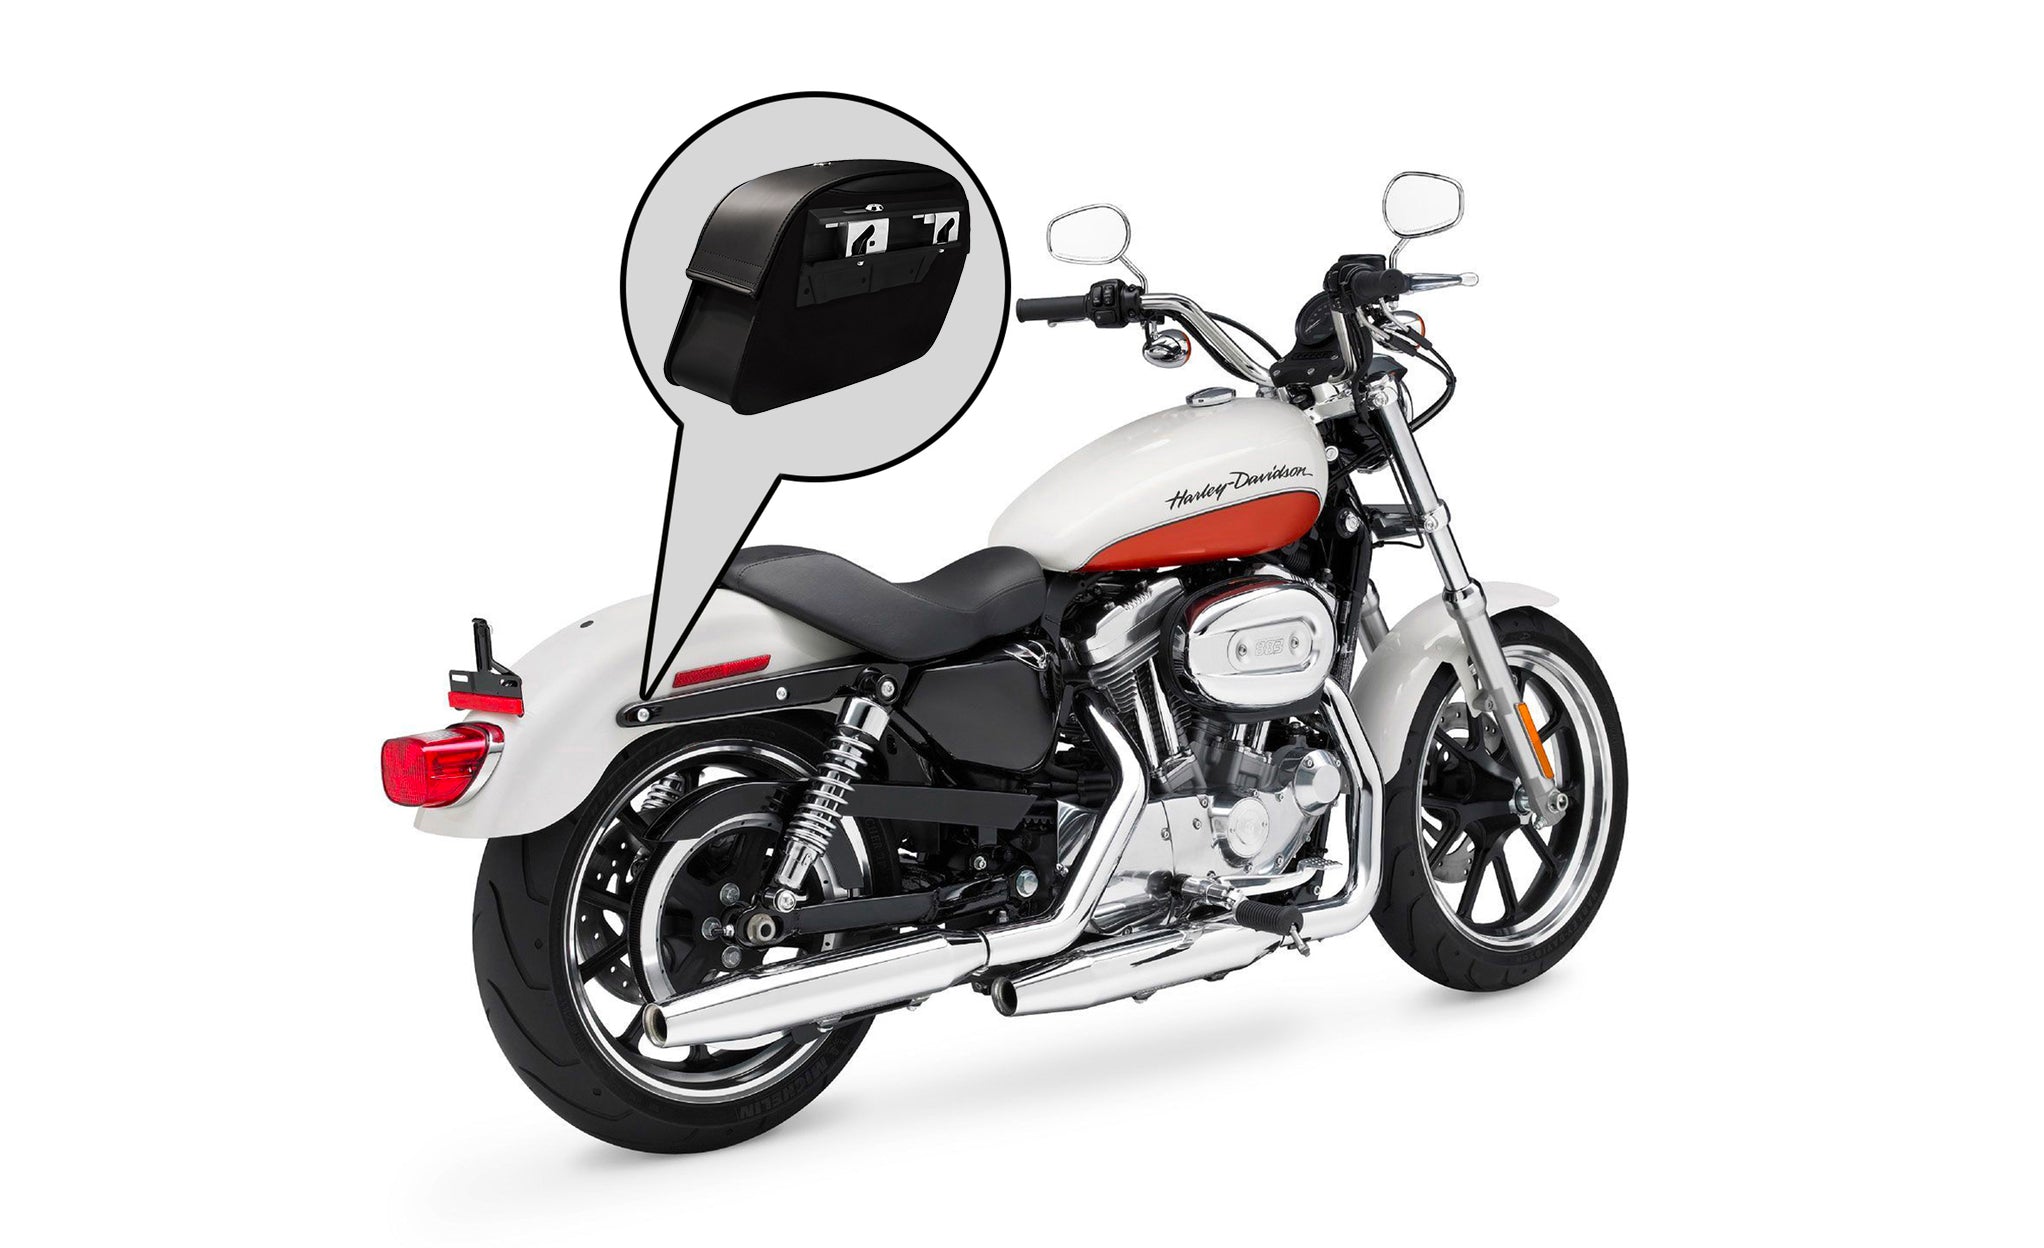 Viking Saddlebags Quick Disconnect System For Harley Davidson Softail @expand